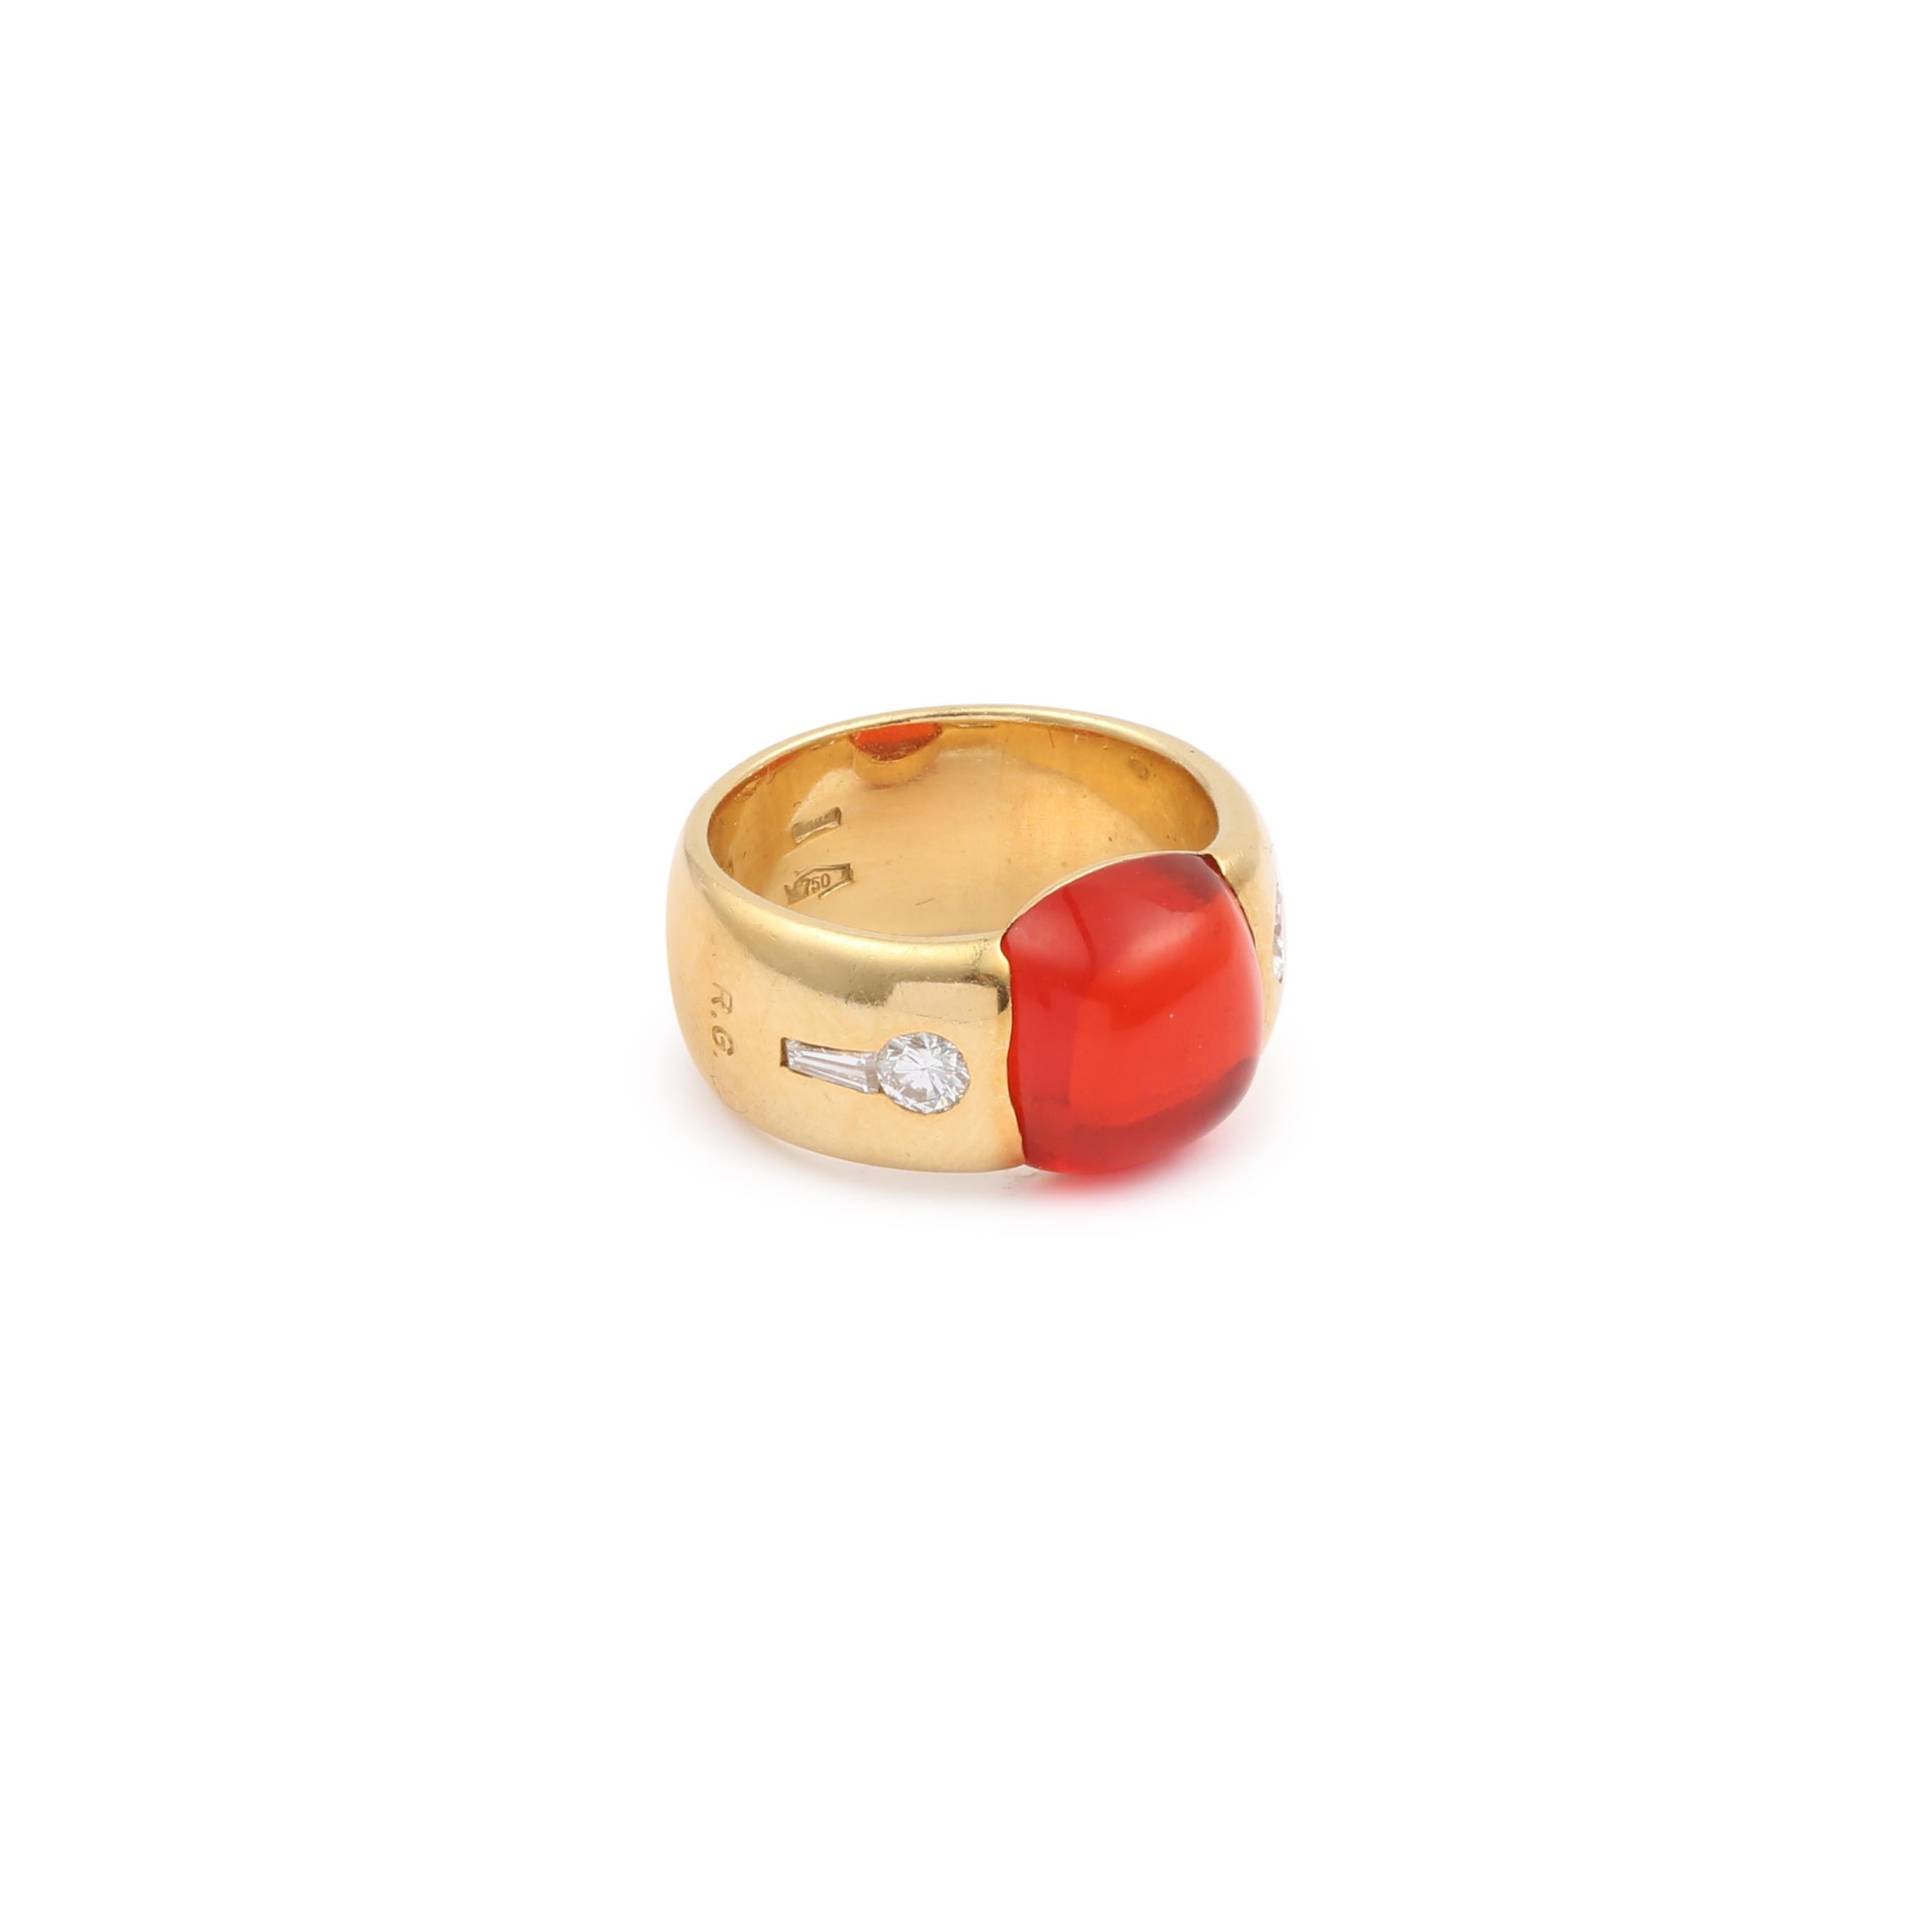 Yellow gold ring set with a fire opal cabochon and small baguette and brilliant diamonds.

Dimensions : 10.10 x 19.47 x 5.49 mm (0.397 x 0.766 x 0.216 inch)

Estimated weight of the opal : 3 carats

Total estimated weight of the diamonds : 0.30